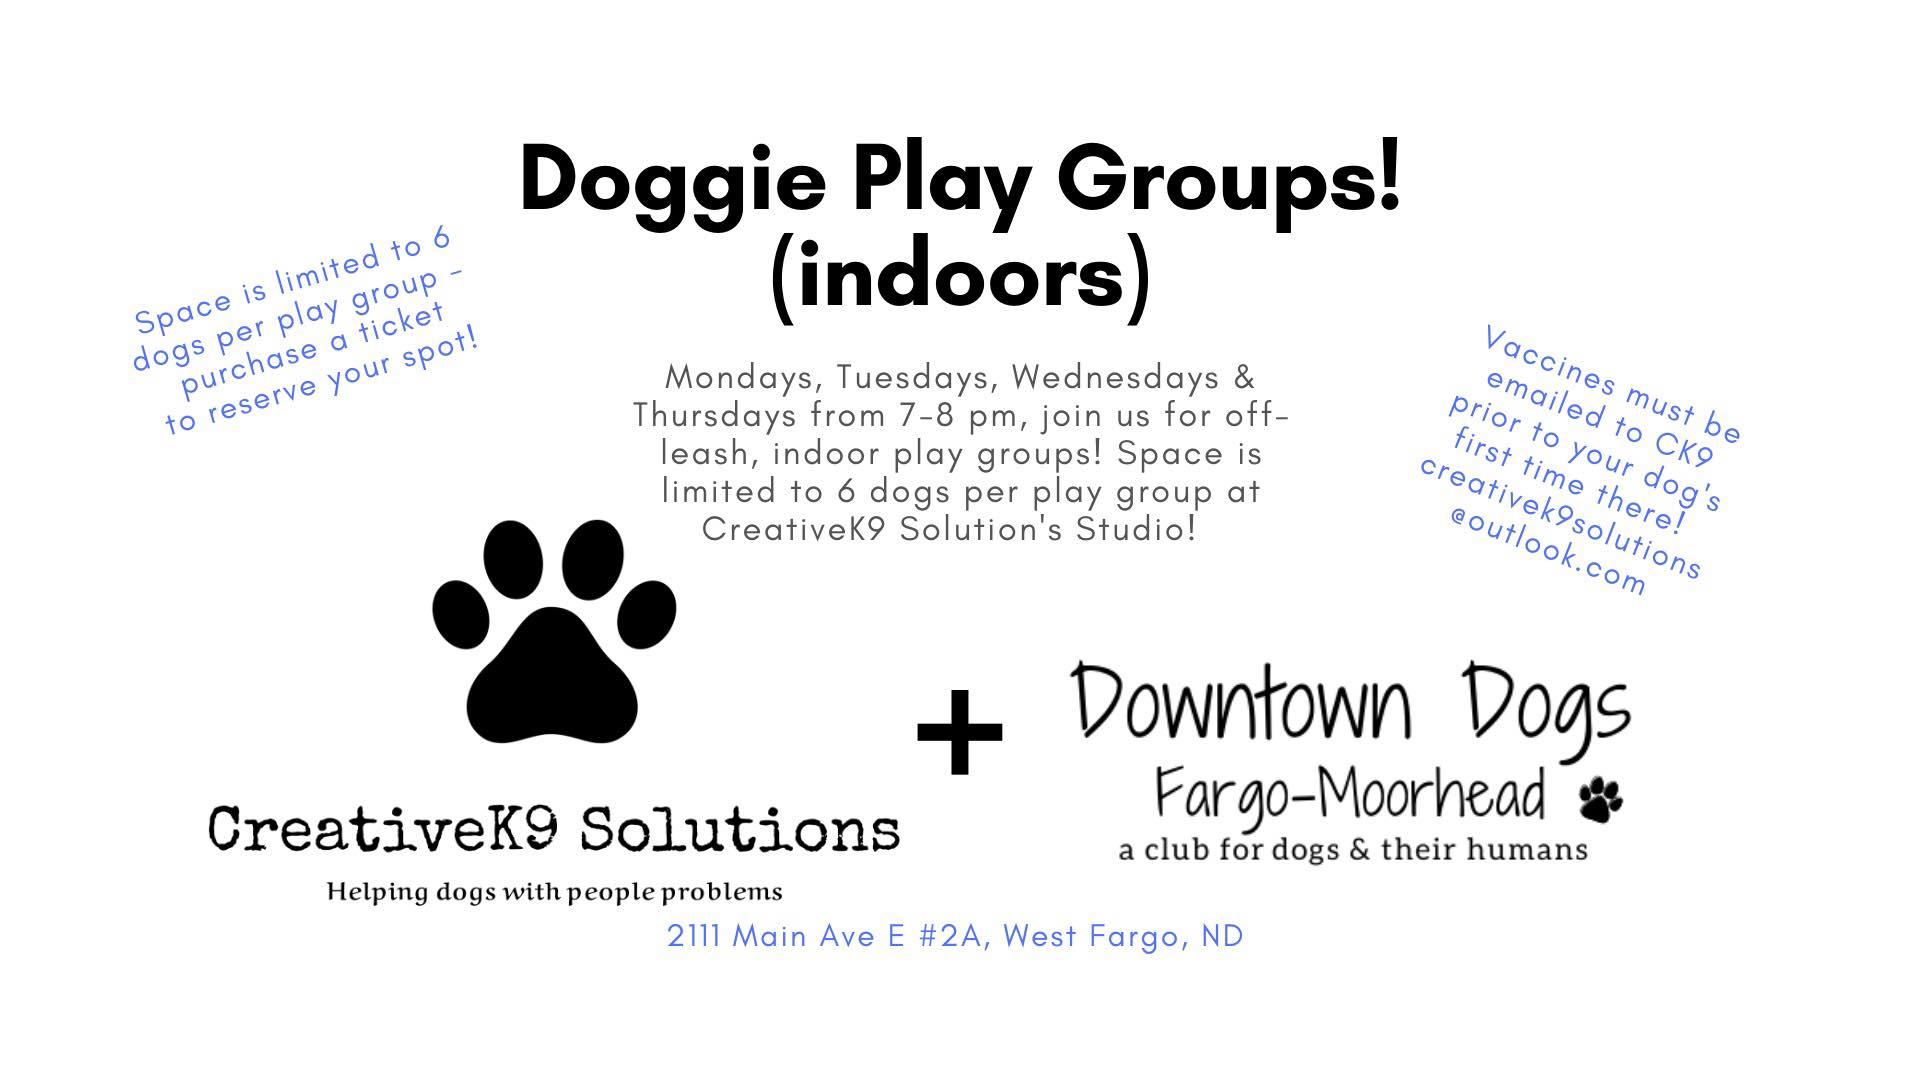 Downtown Dogs @ CreativeK9 Solutions - Private meet ups